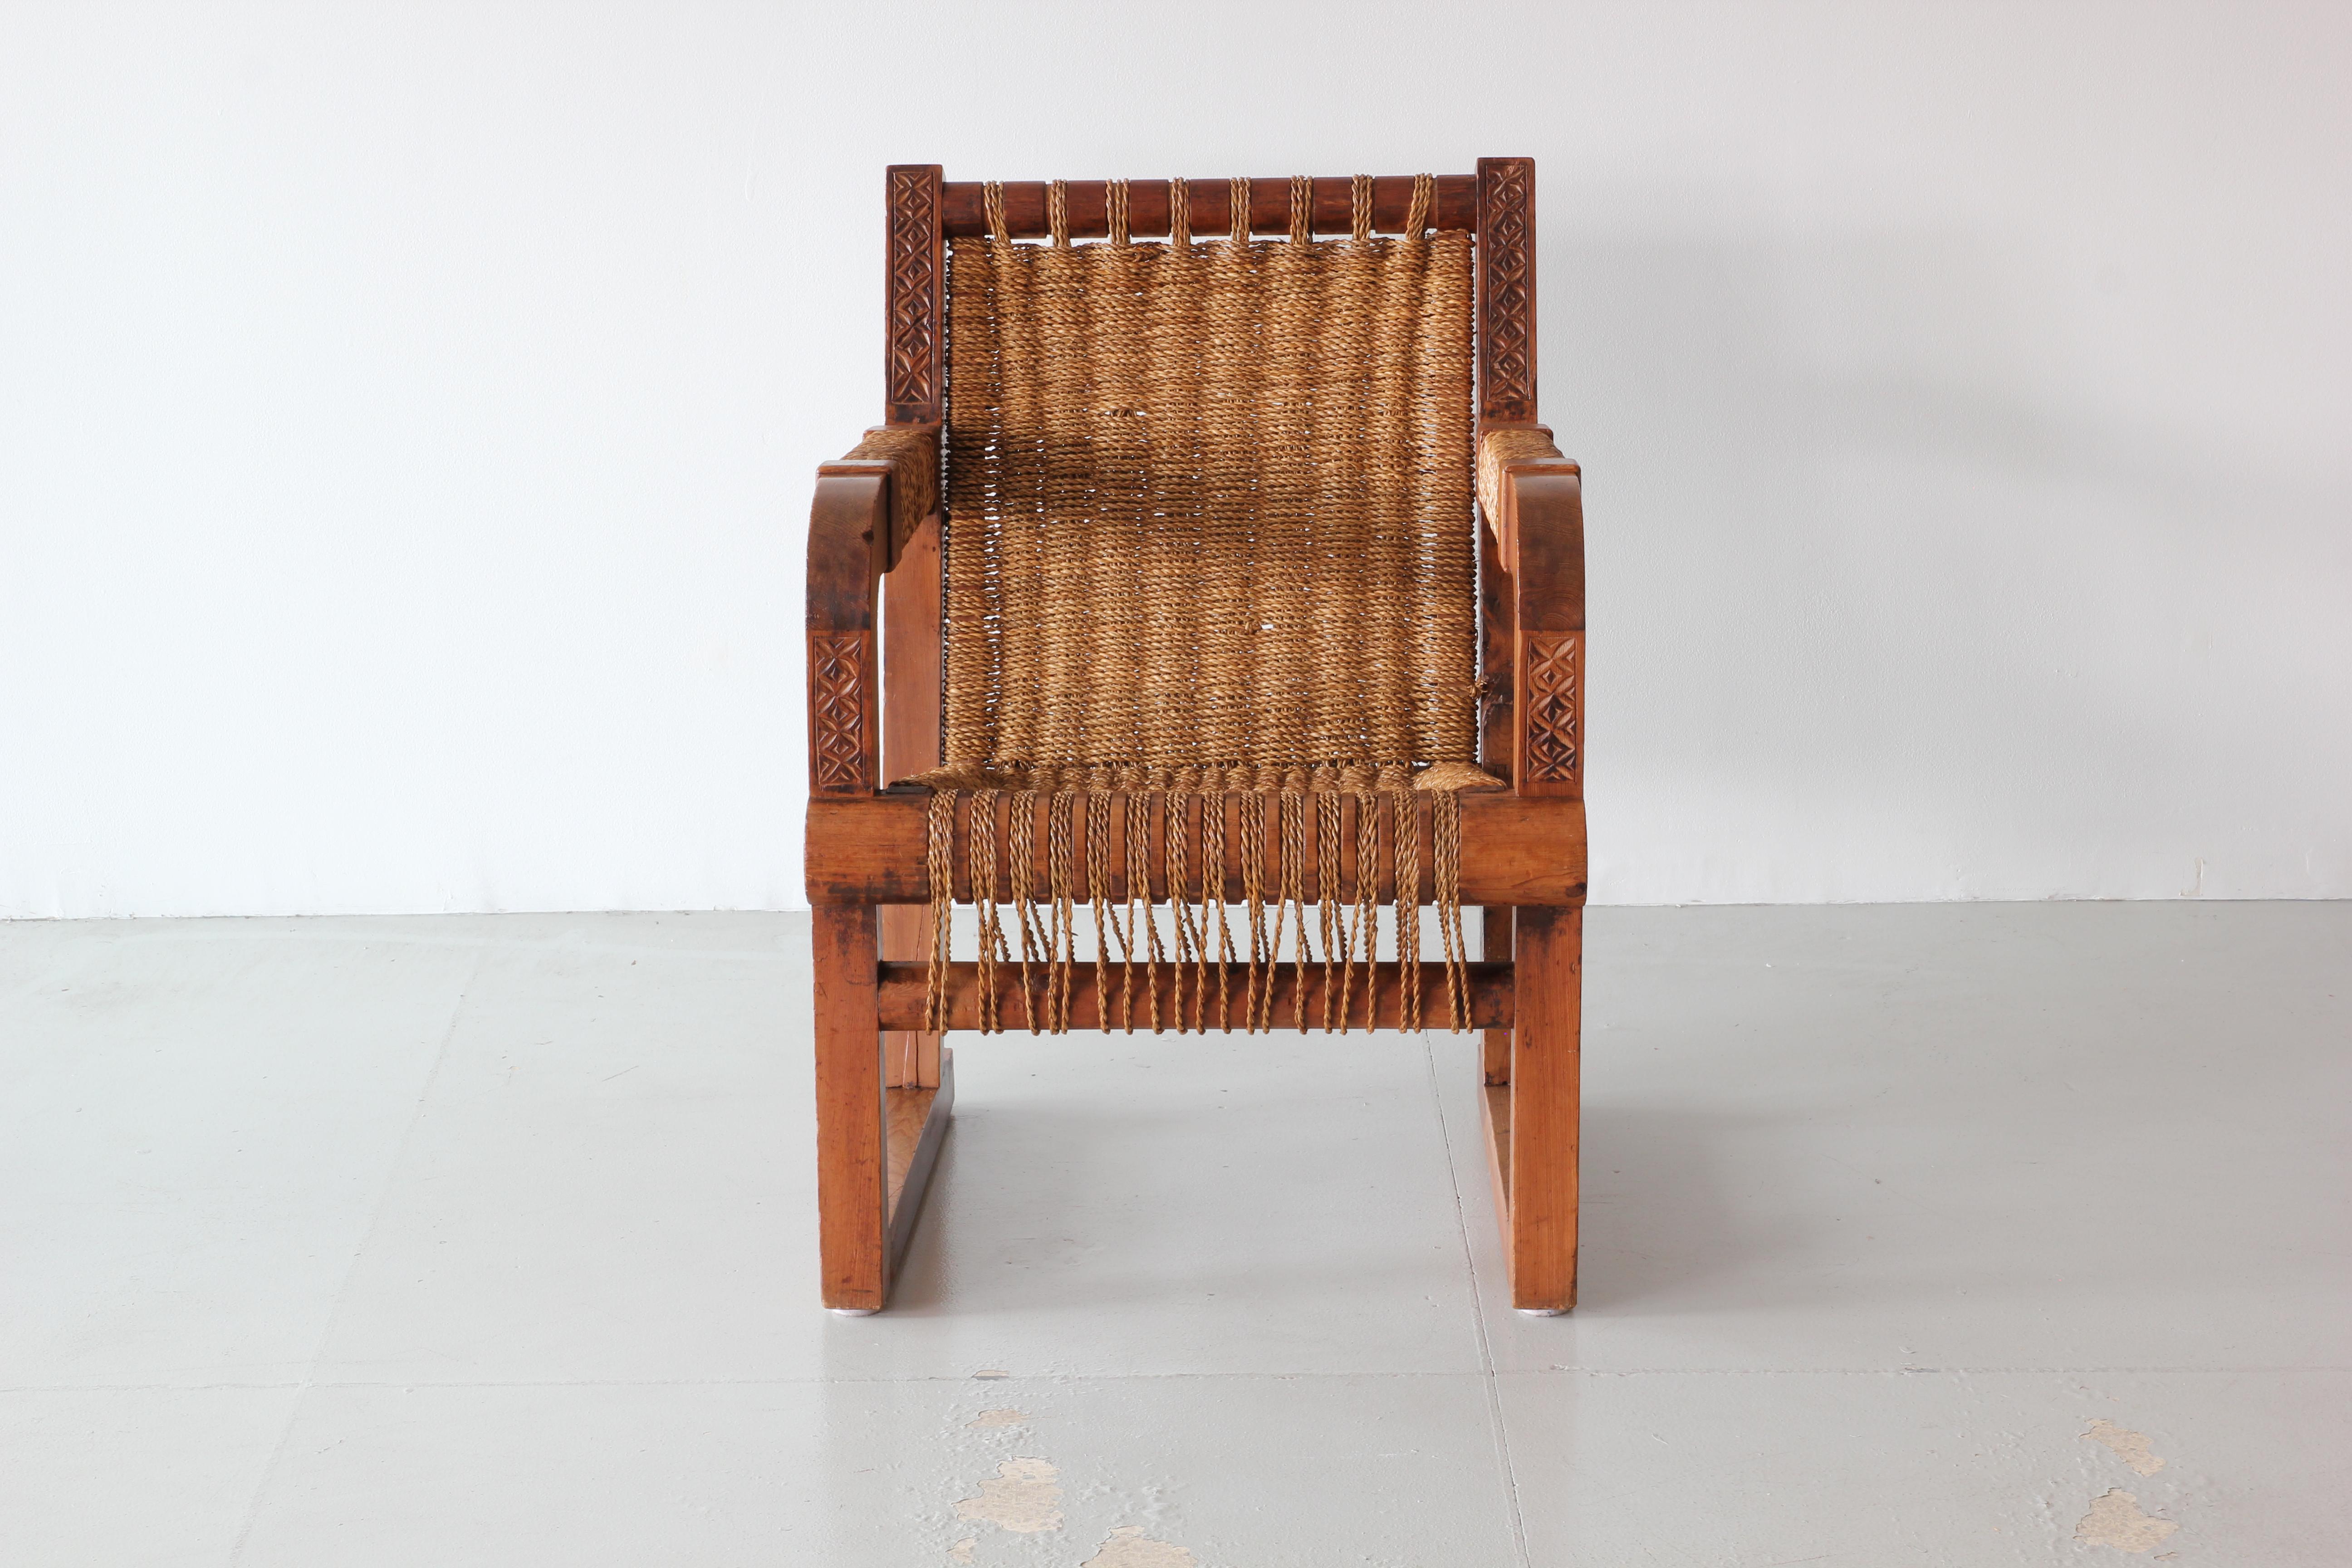 Wonderful woven chair by Francis Jourdain with woven seat and back, intricate carvings detailing throughout and oak frame.